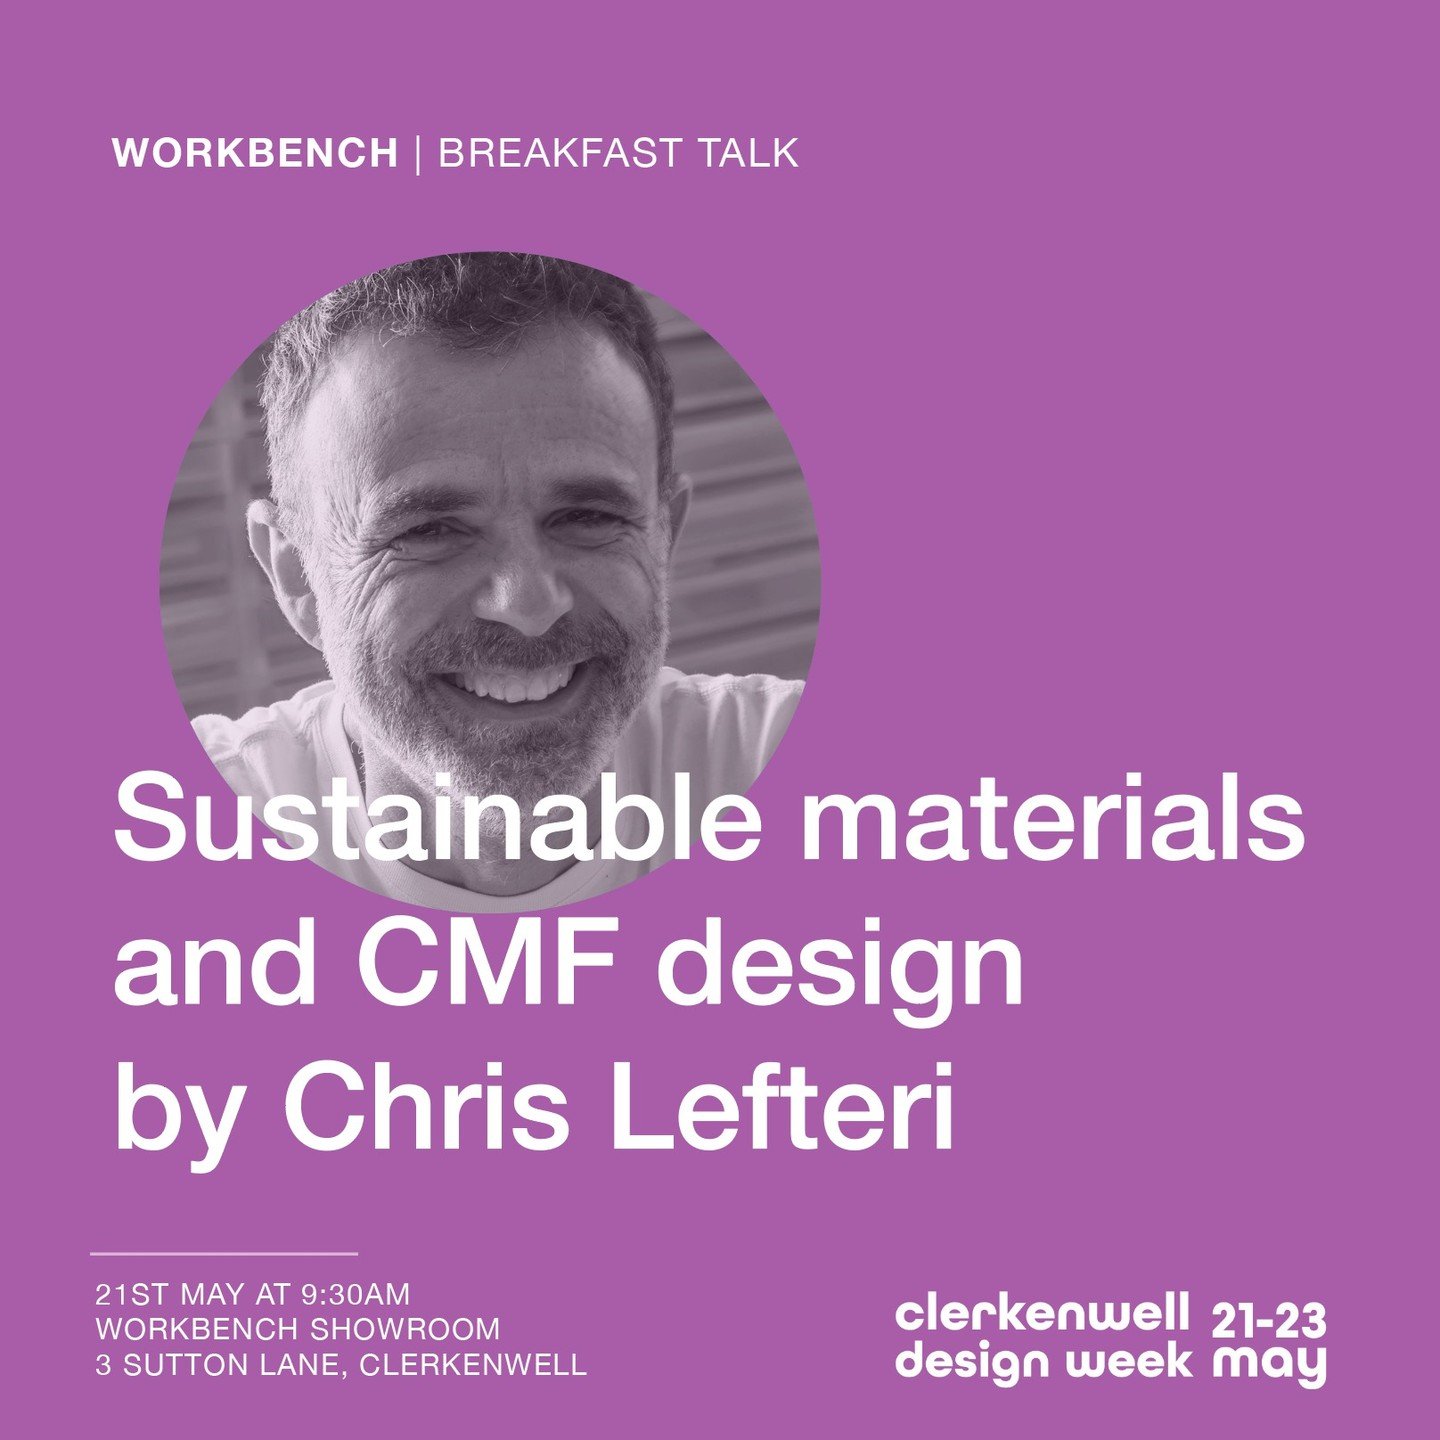 I'll be joining @WorkbenchLtd for an exclusive round table event, over breakfast, to discuss sustainable materials and CMF design on May 21st.

RSVP to @WorkbenchLtd if you wish to attend ! 

#materials #sustainibility #cmf #clerkenwelldesignweek #cd